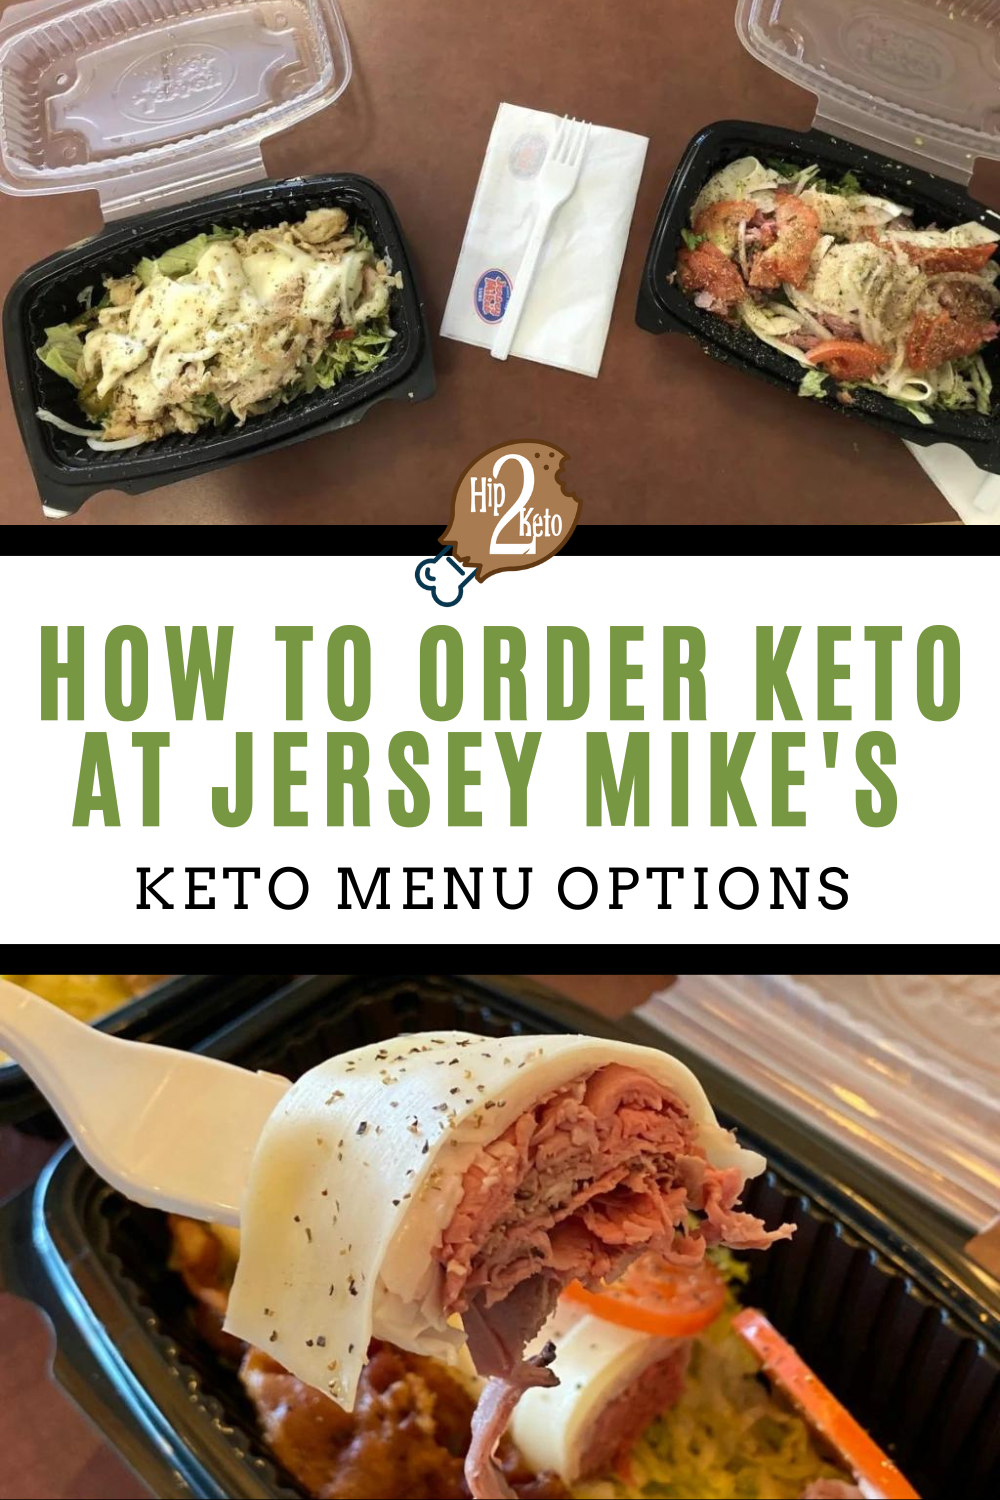 Jersey Mike's Sub in a Tub Guide for Low Carb Dieters - Mr. SkinnyPants